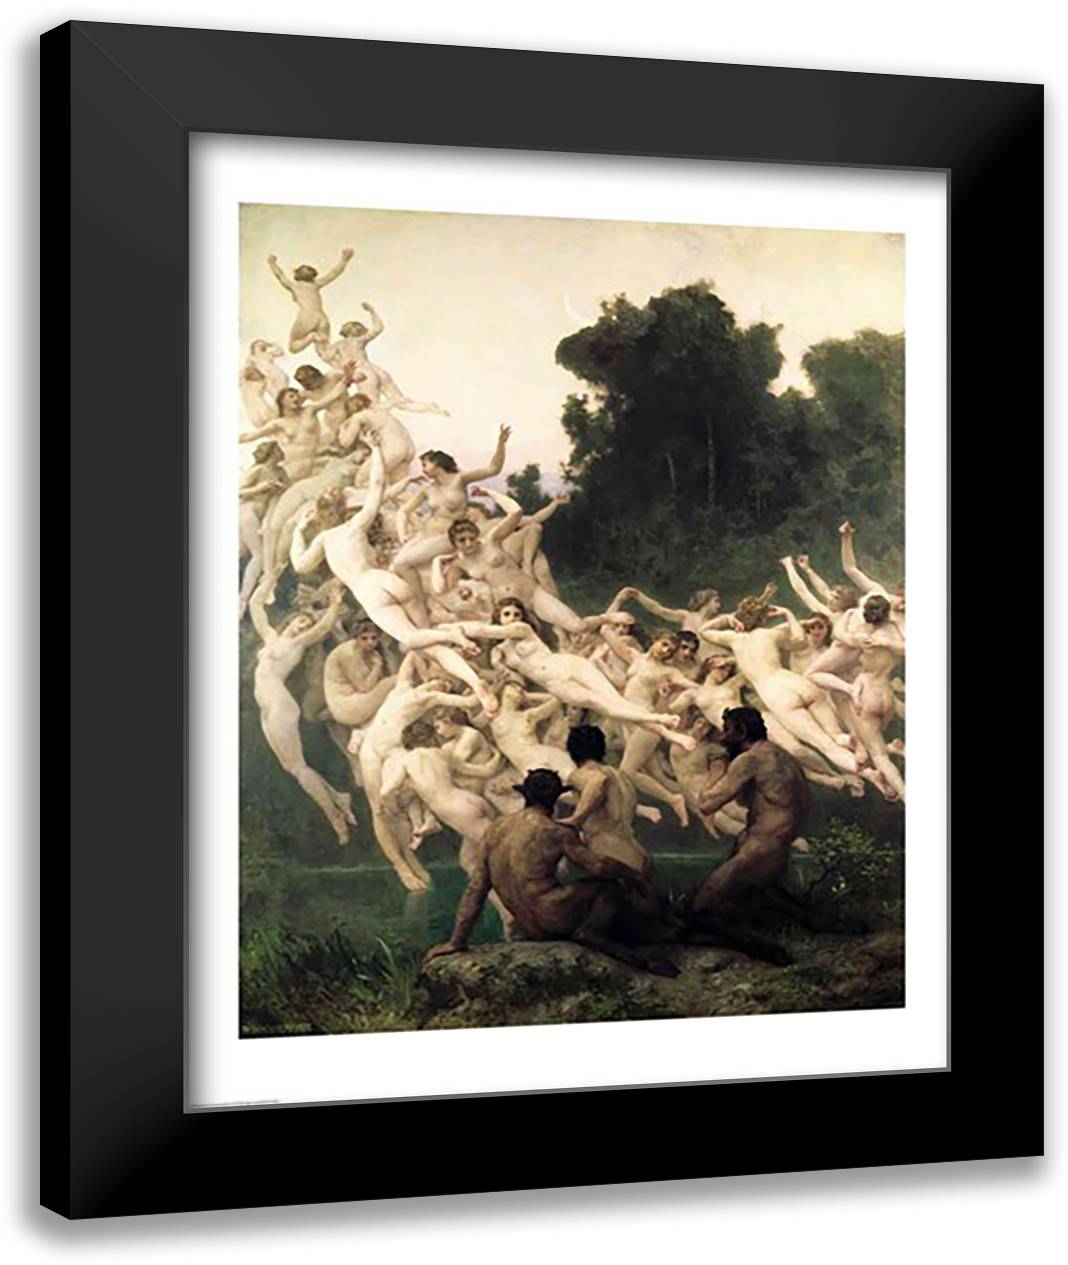 The Oreads, 1902 22x28 Black Modern Wood Framed Art Print Poster by Bouguereau, William Adolphe